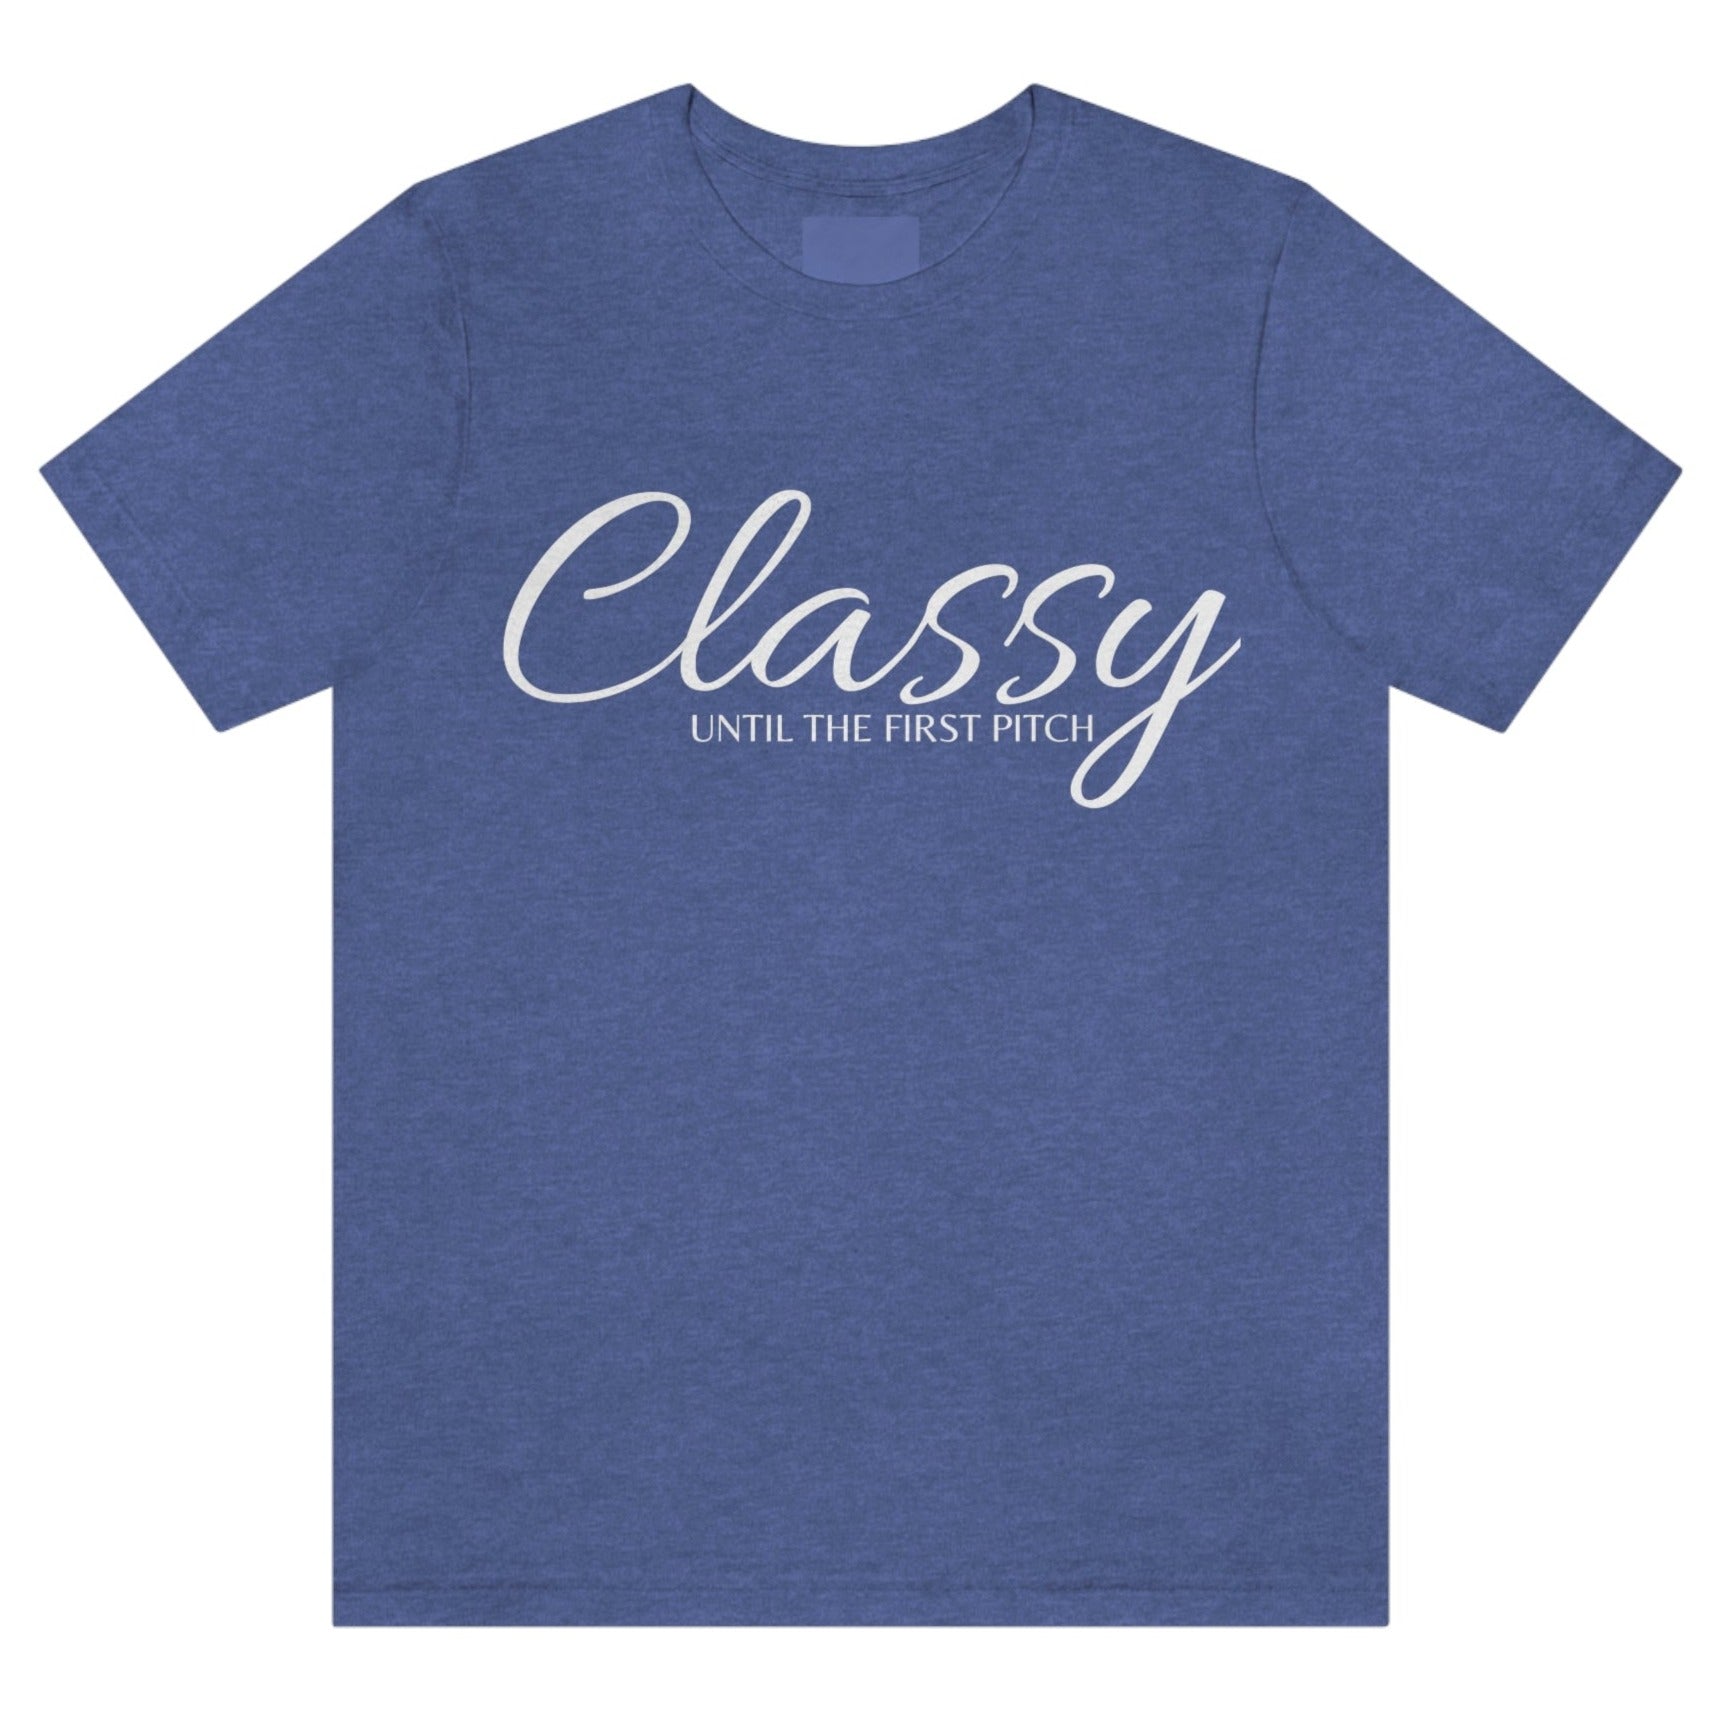 classy-until-the-first-pitch-heather-true-royal-t-shirt-baseball-womens